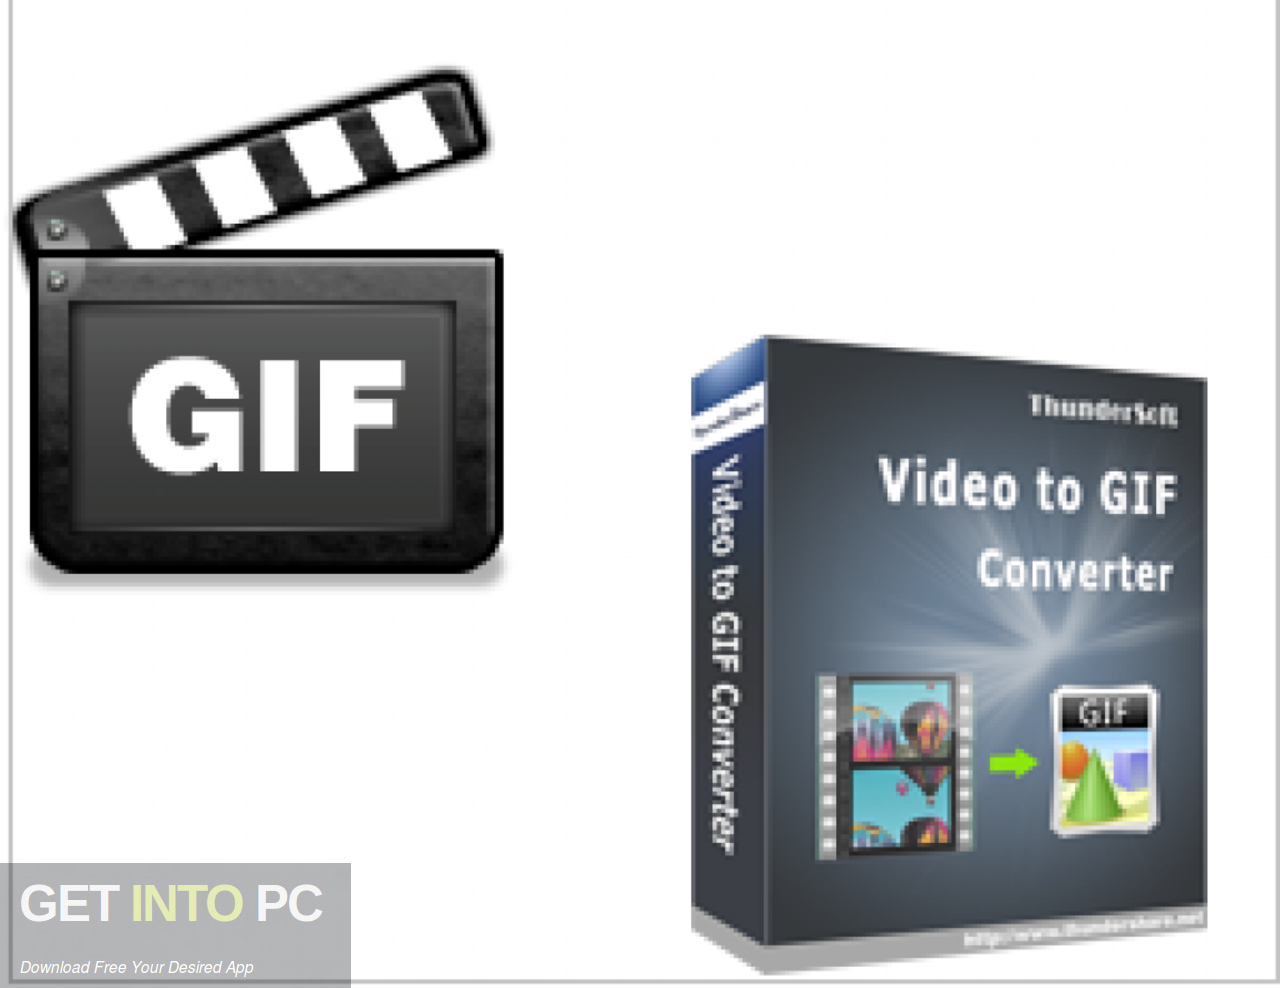 ThunderSoft Video to GIF Converter 2020 Free Download